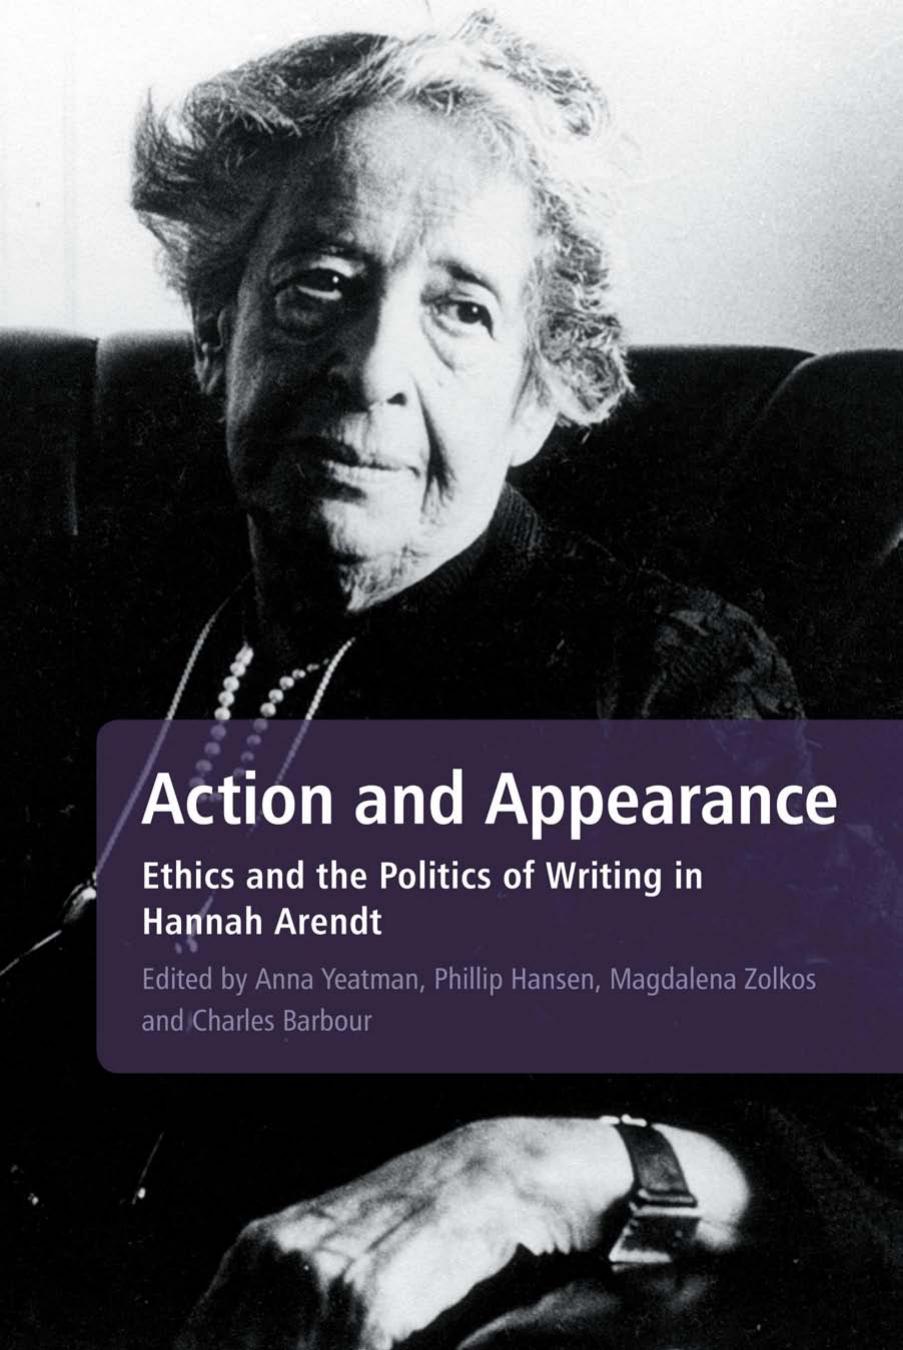 Action and Appearance: Ethics and the Politics of Writing in Hannah Arendt